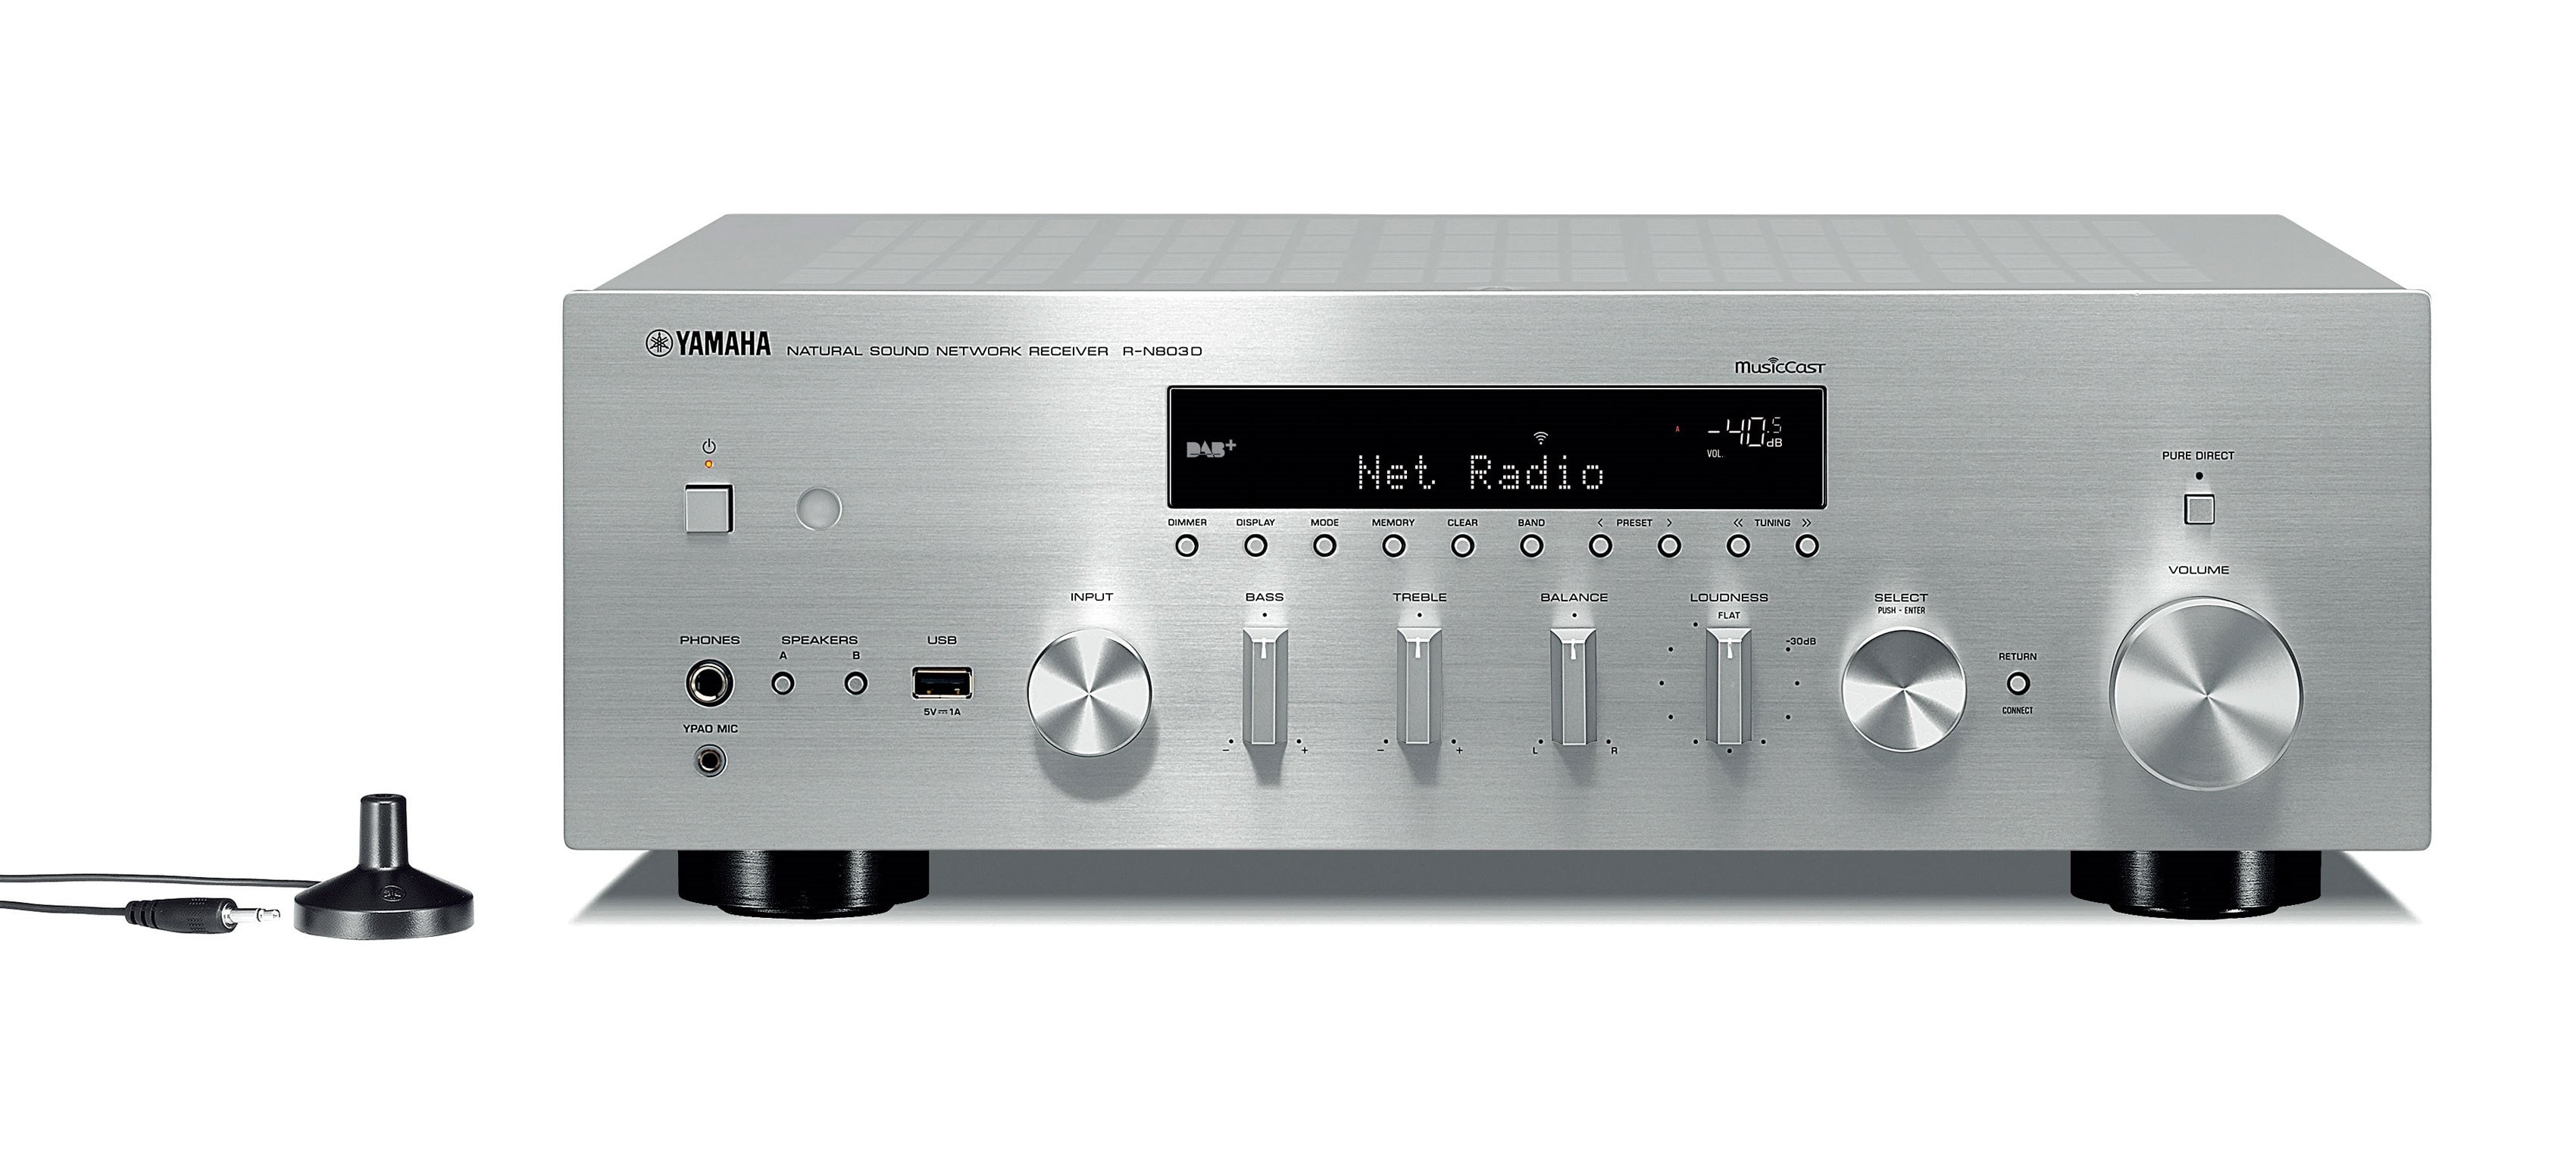 MusicCast R-N803D - Overview - HiFi Components - Audio & Visual 